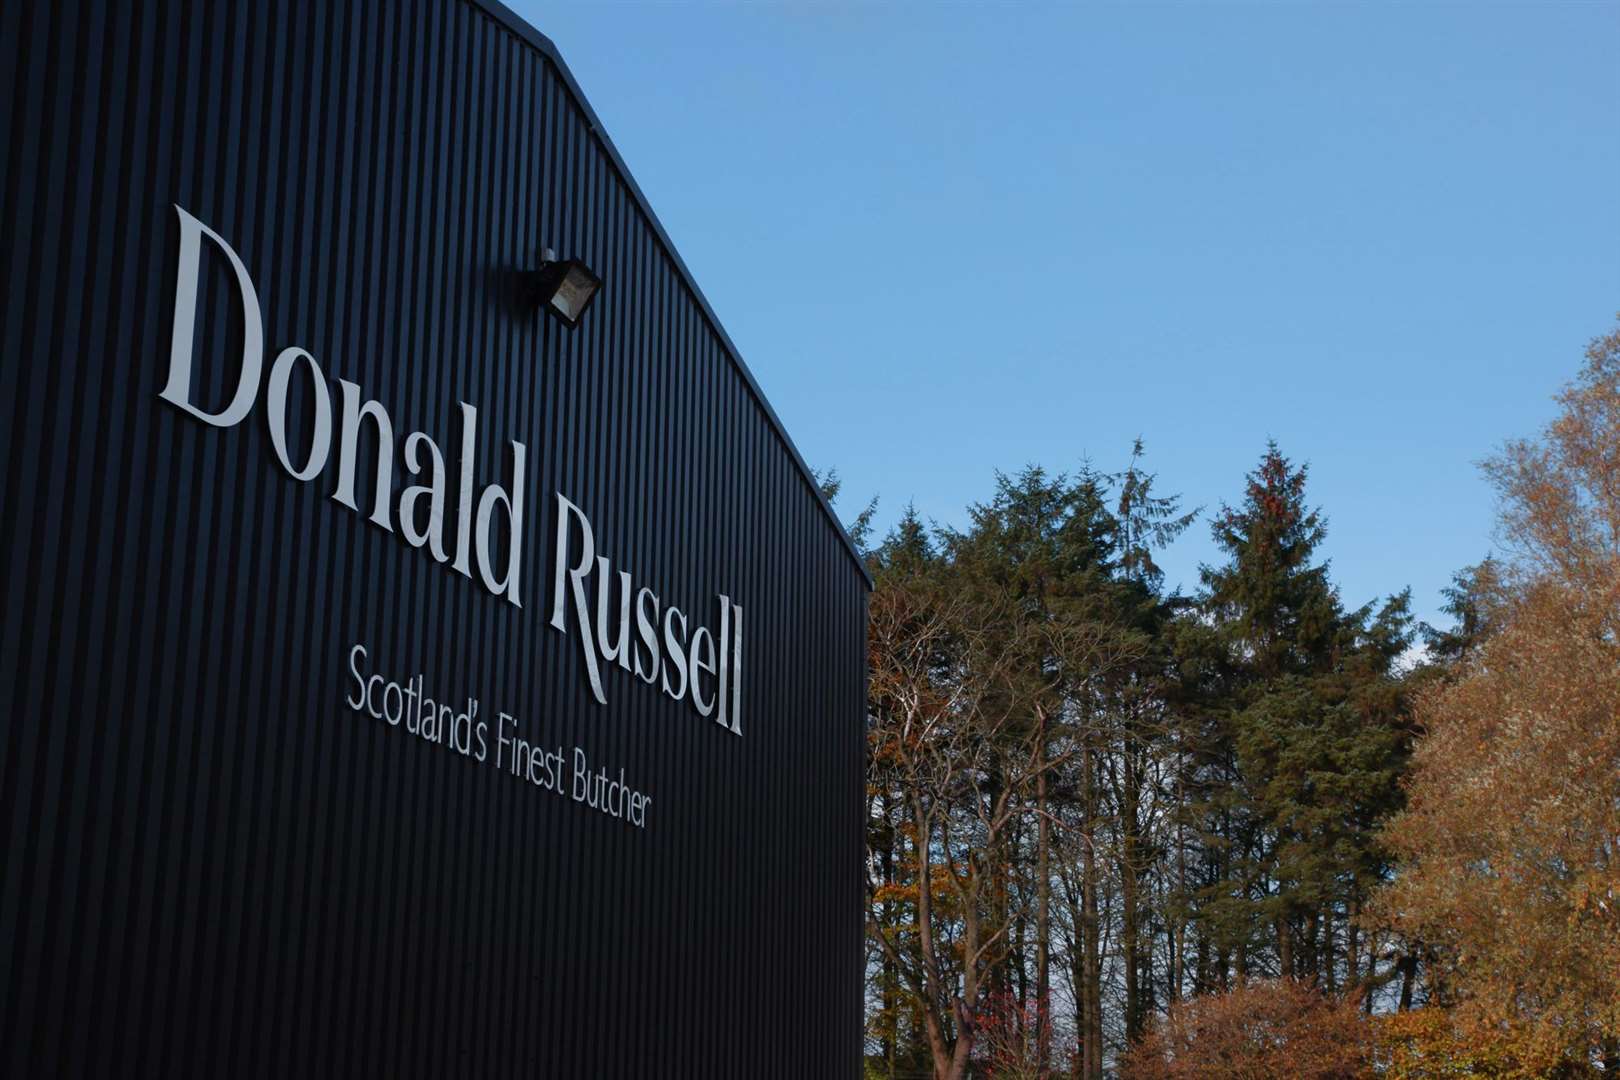 Butchery firm Donald Russell has been recognised for its customer service.